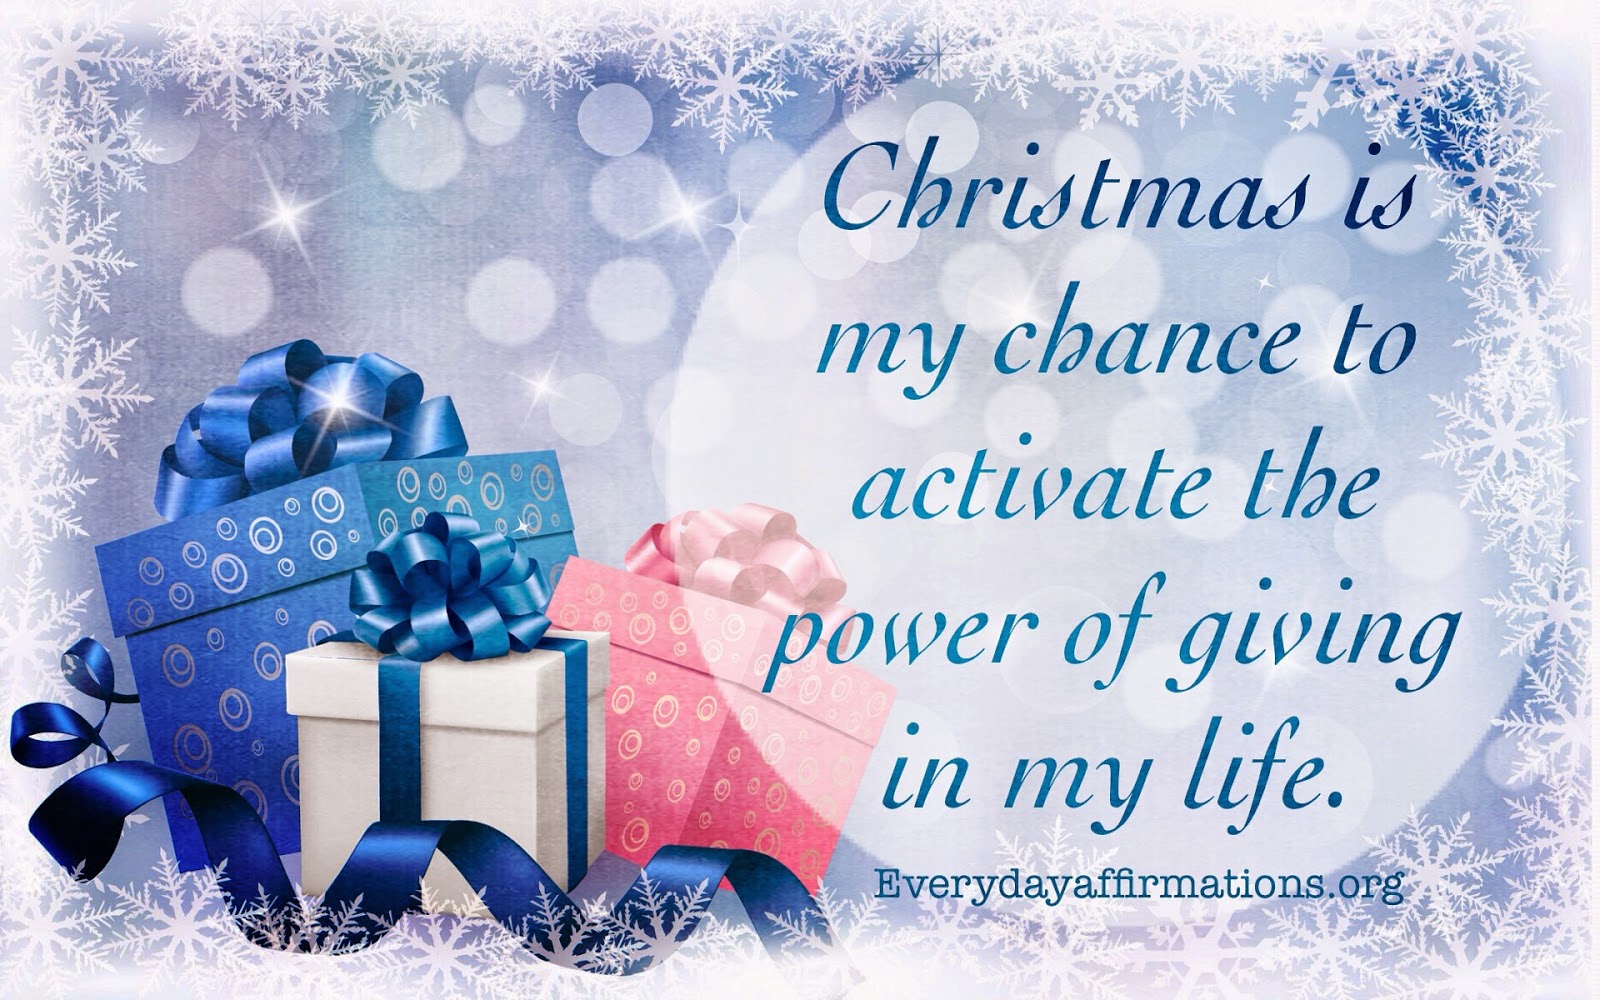 daily affirmations, affirmations for Christmas, affirmations for new year, love affirmations